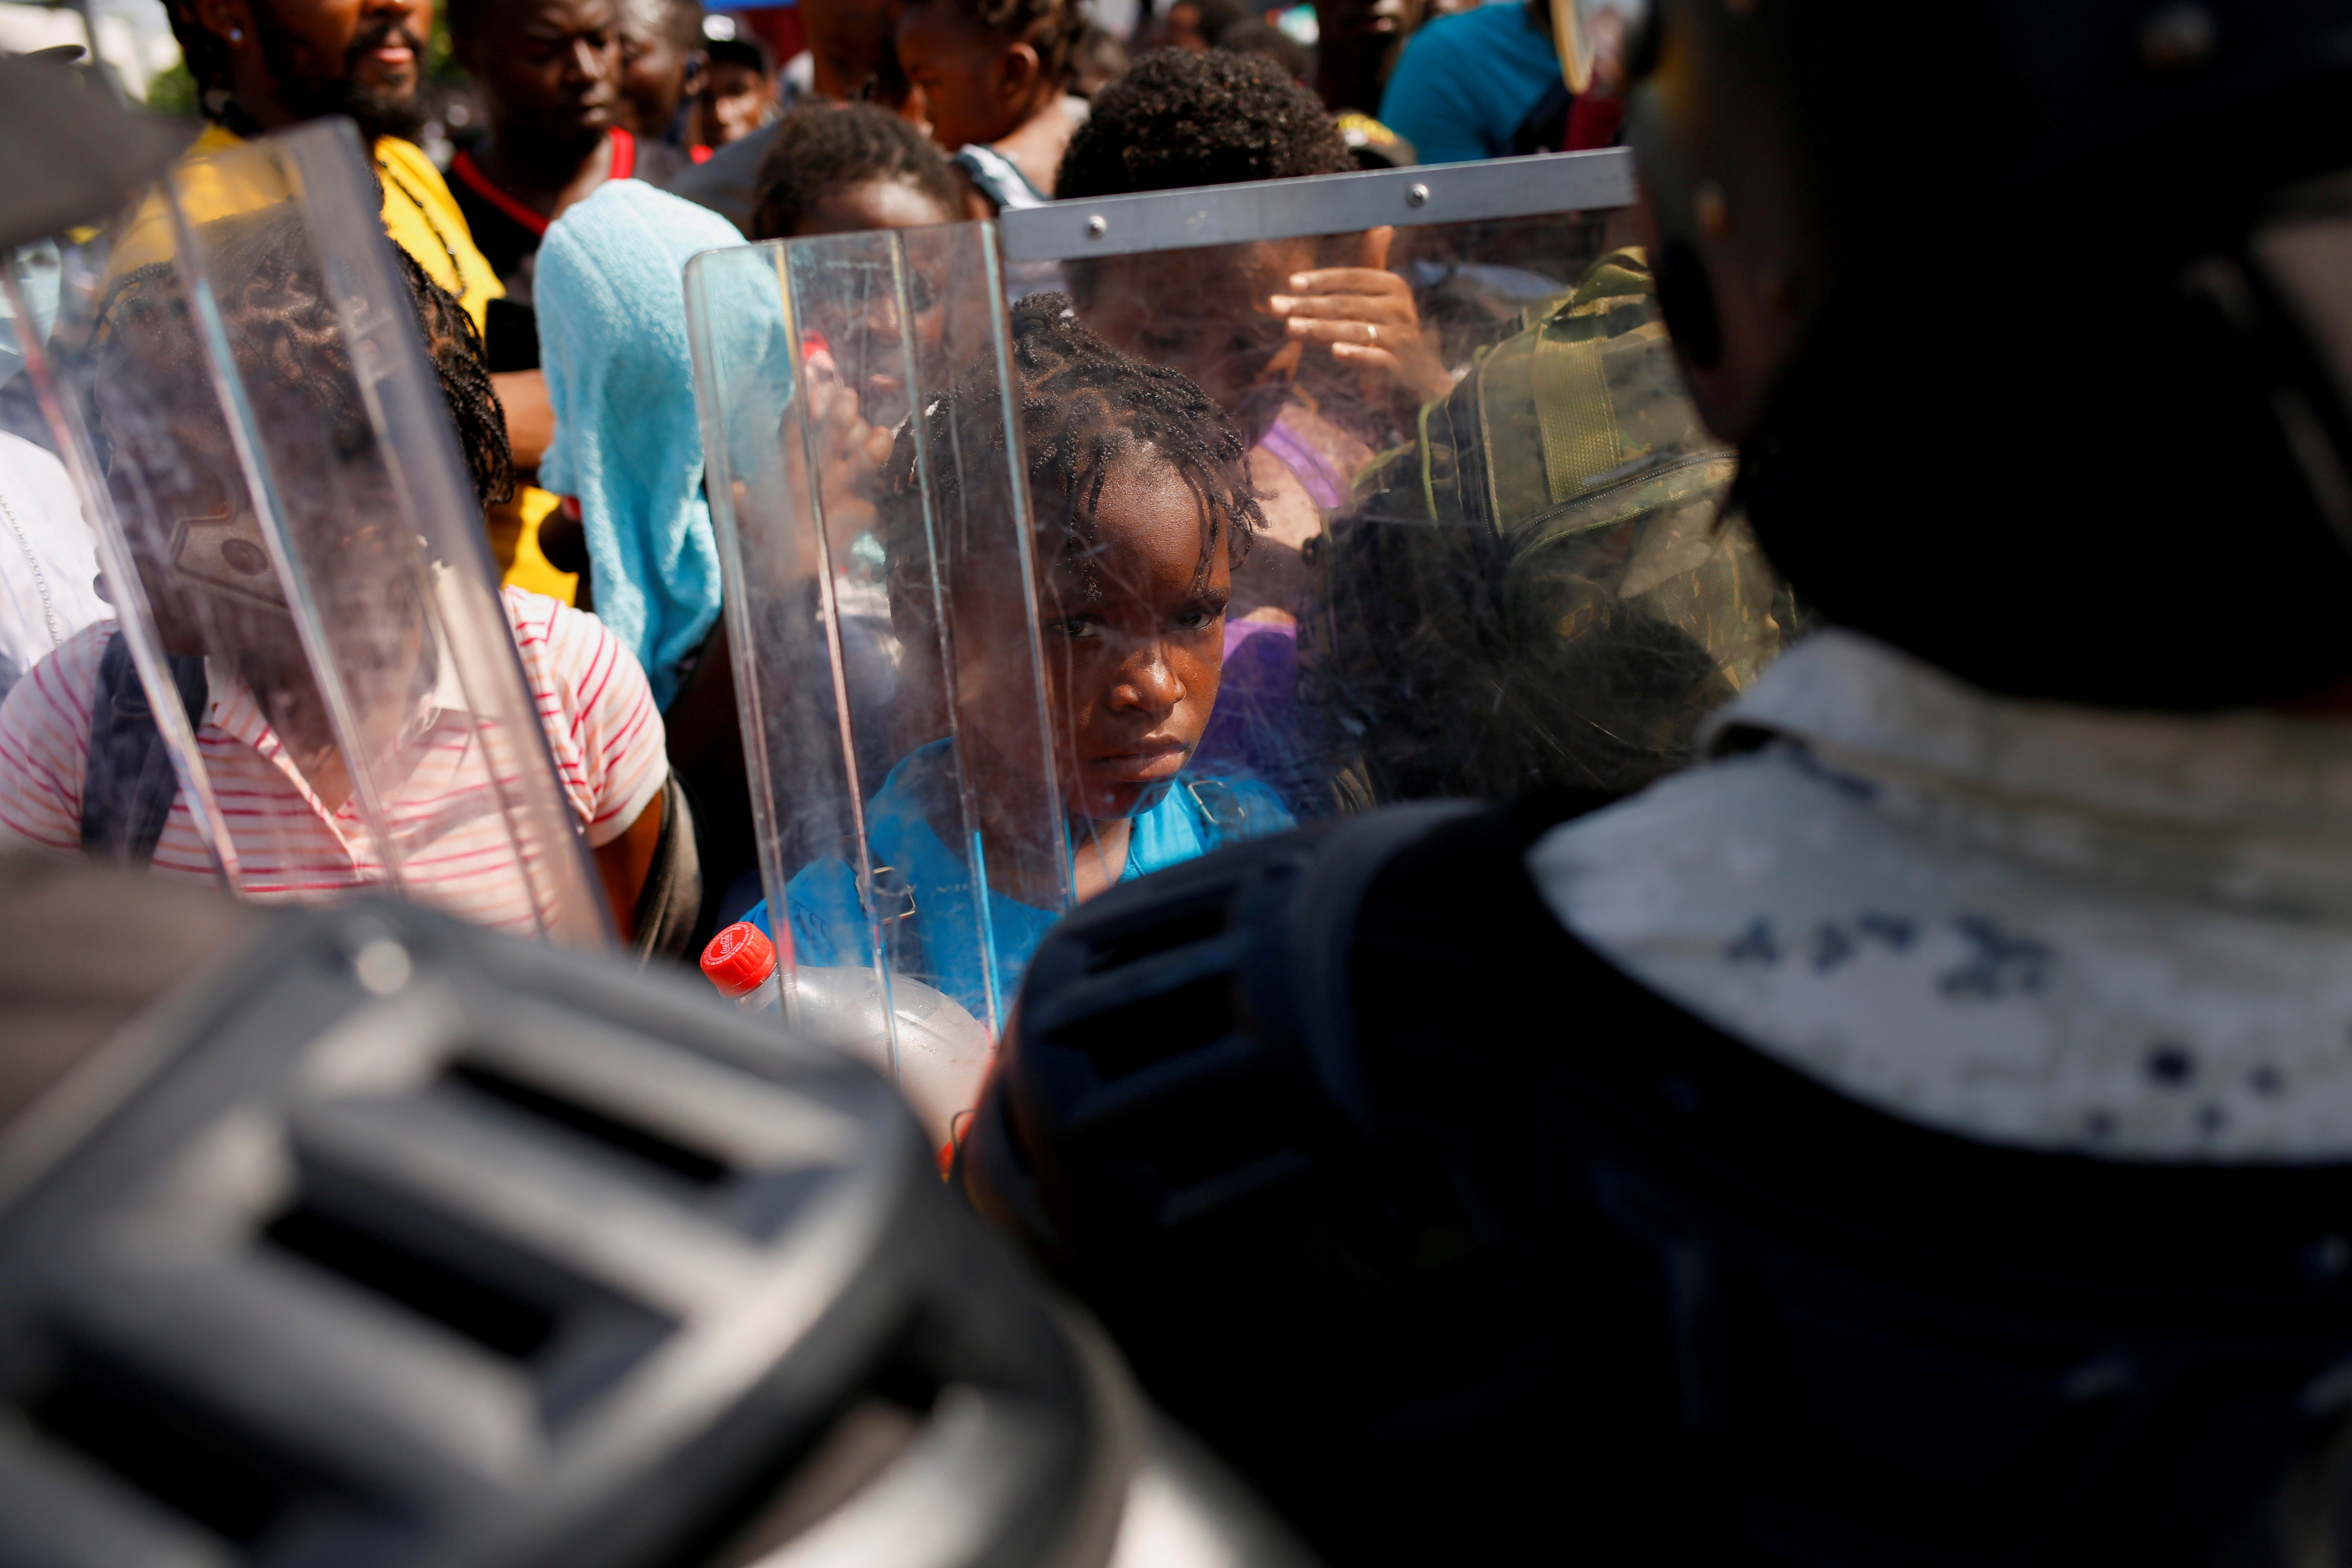 A migrant child is seen through a National Guard member’s shield as he and others queue to get on buses after accepting an offer from the Mexican government to obtain humanitarian visas to transit the Mexican territory, at a stadium in Tapachula, Mexico 25 November 2021